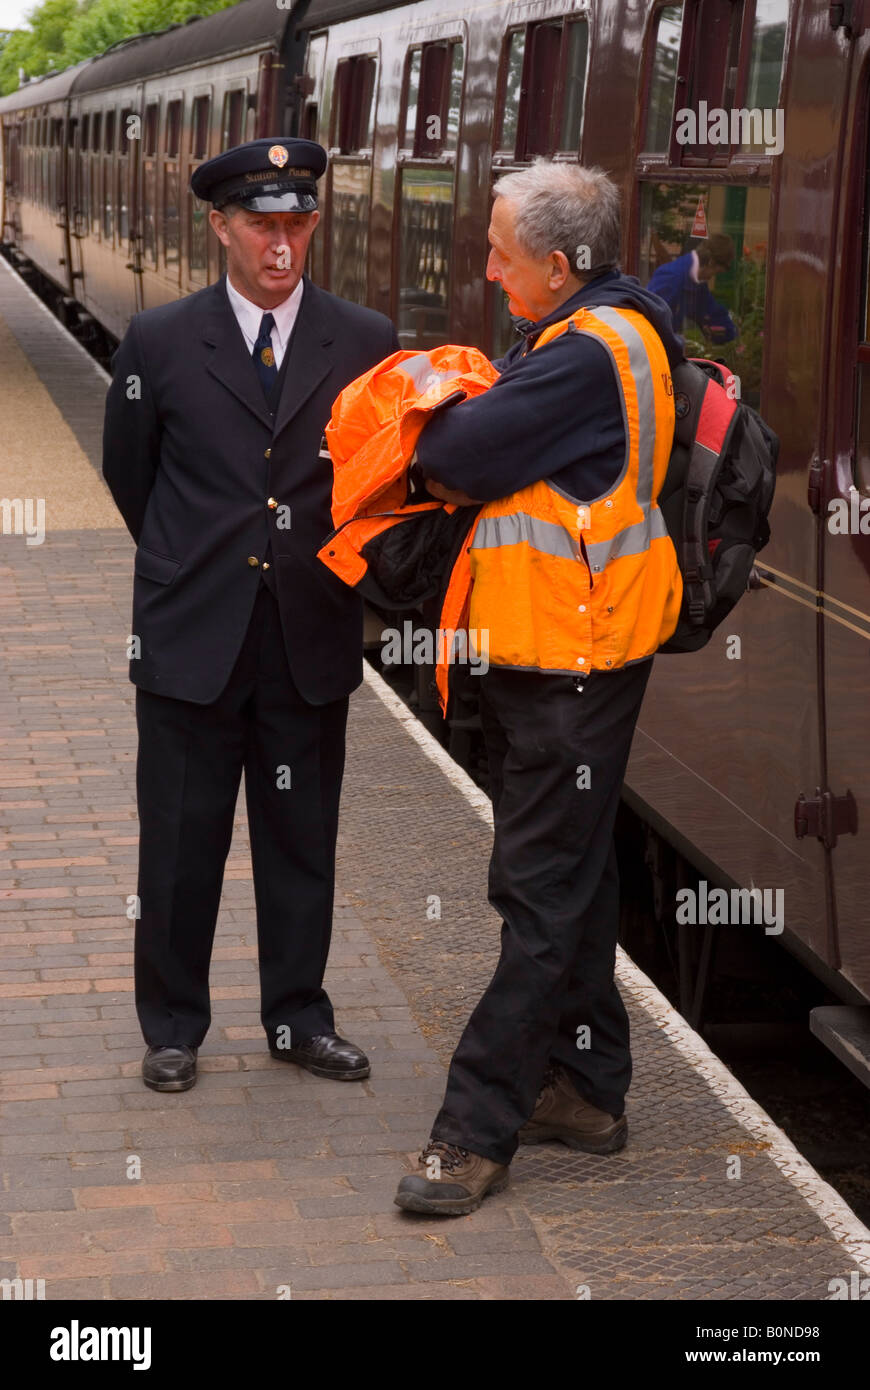 The Station Master Talking To Railway Worker At Holt Station,Norfolk,Uk Stock Photo